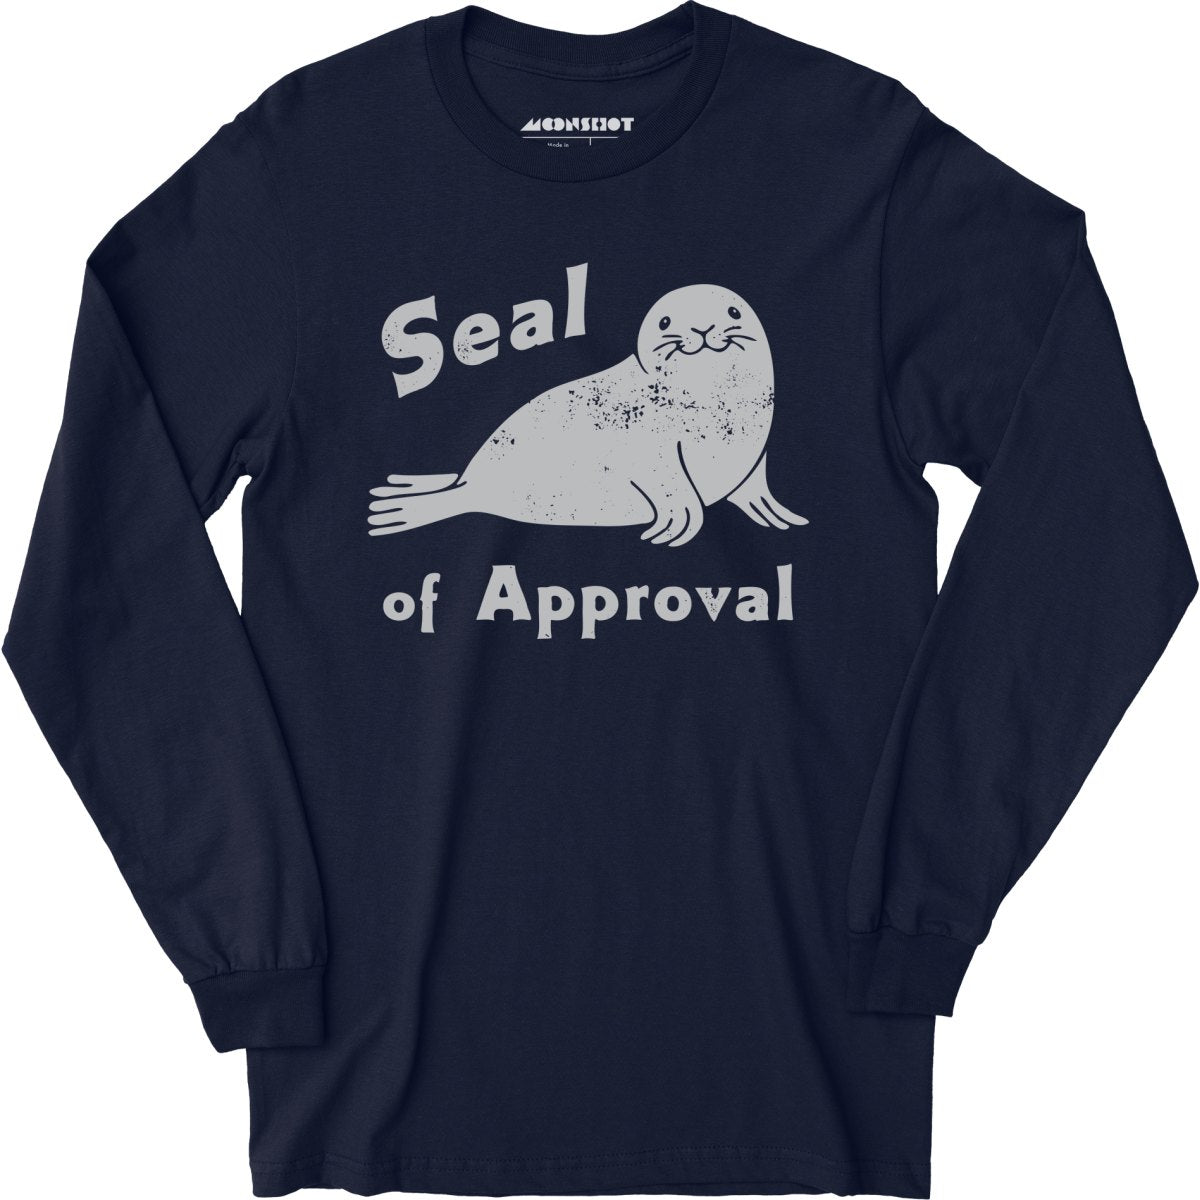 Seal of Approval - Long Sleeve T-Shirt